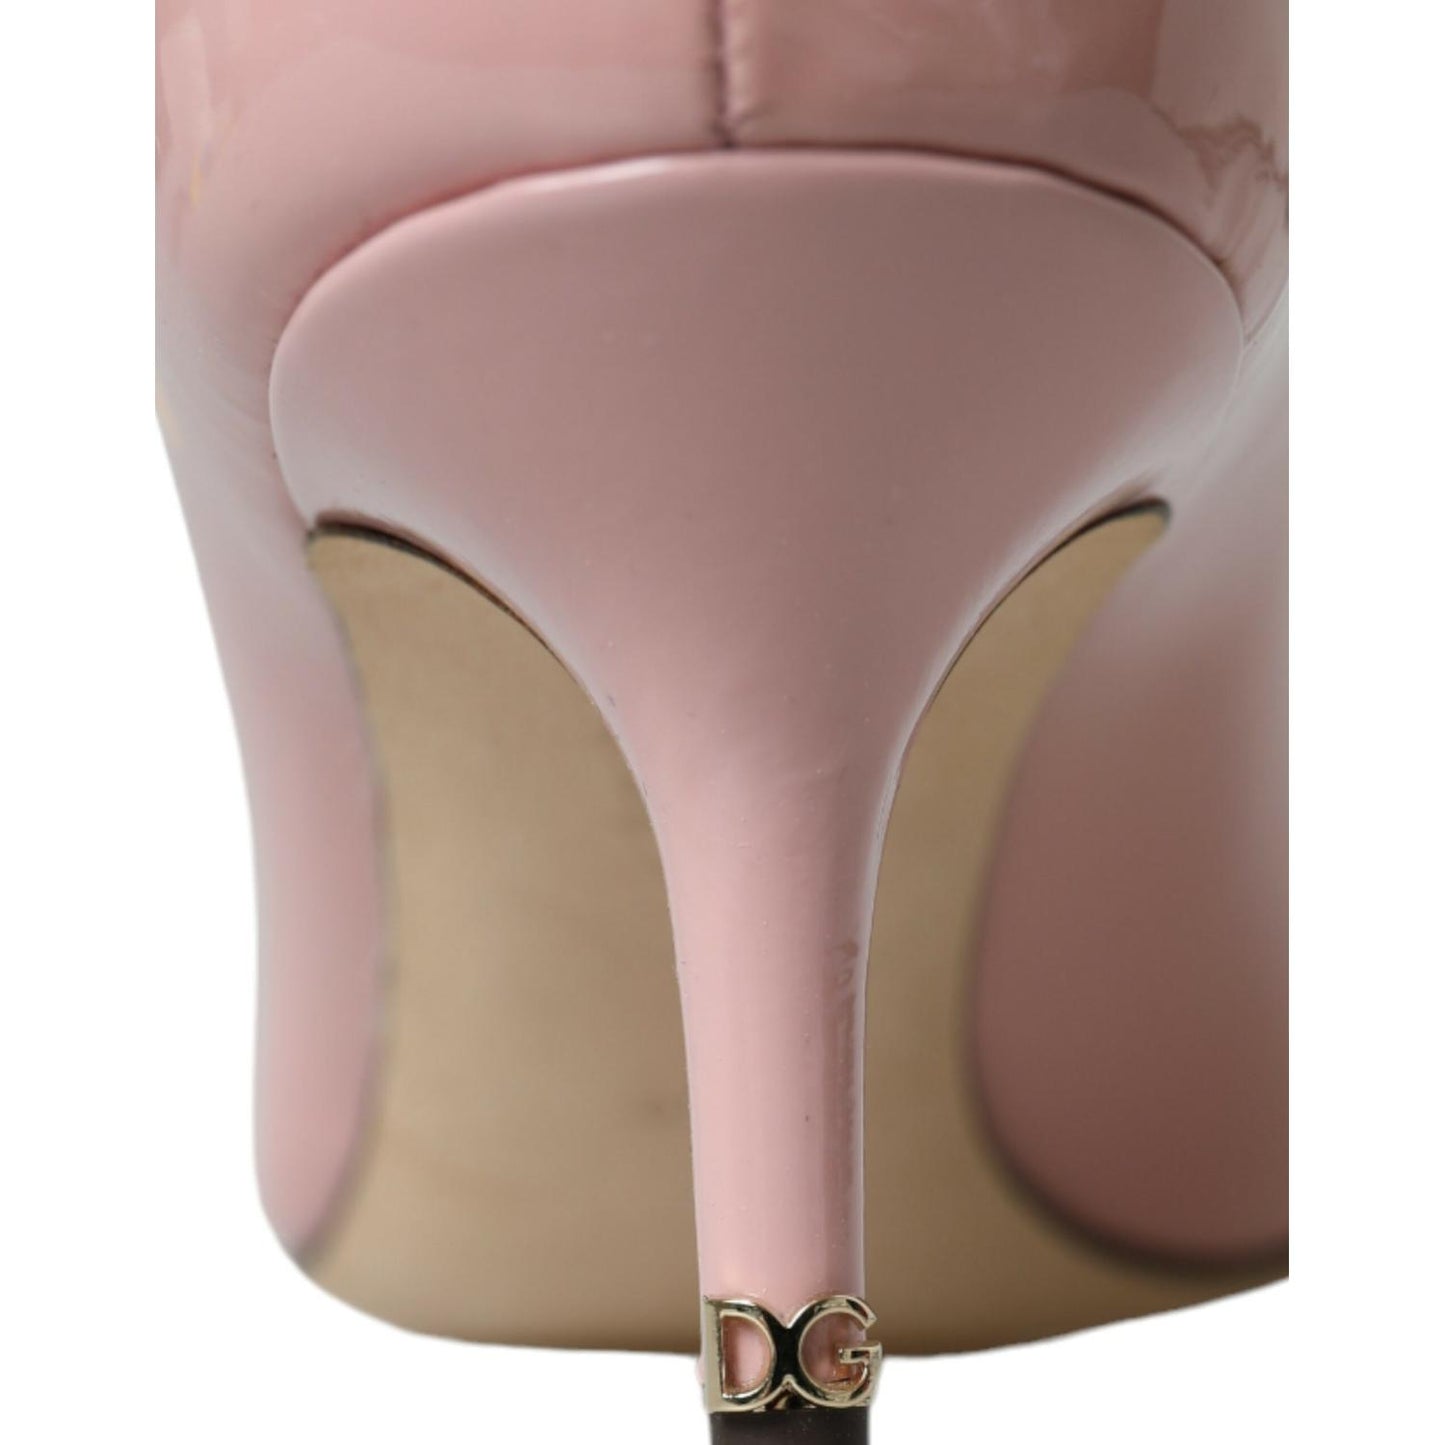 Dolce & Gabbana Light Pink Patent Leather Heels Pumps Shoes light-pink-patent-leather-heels-pumps-shoes